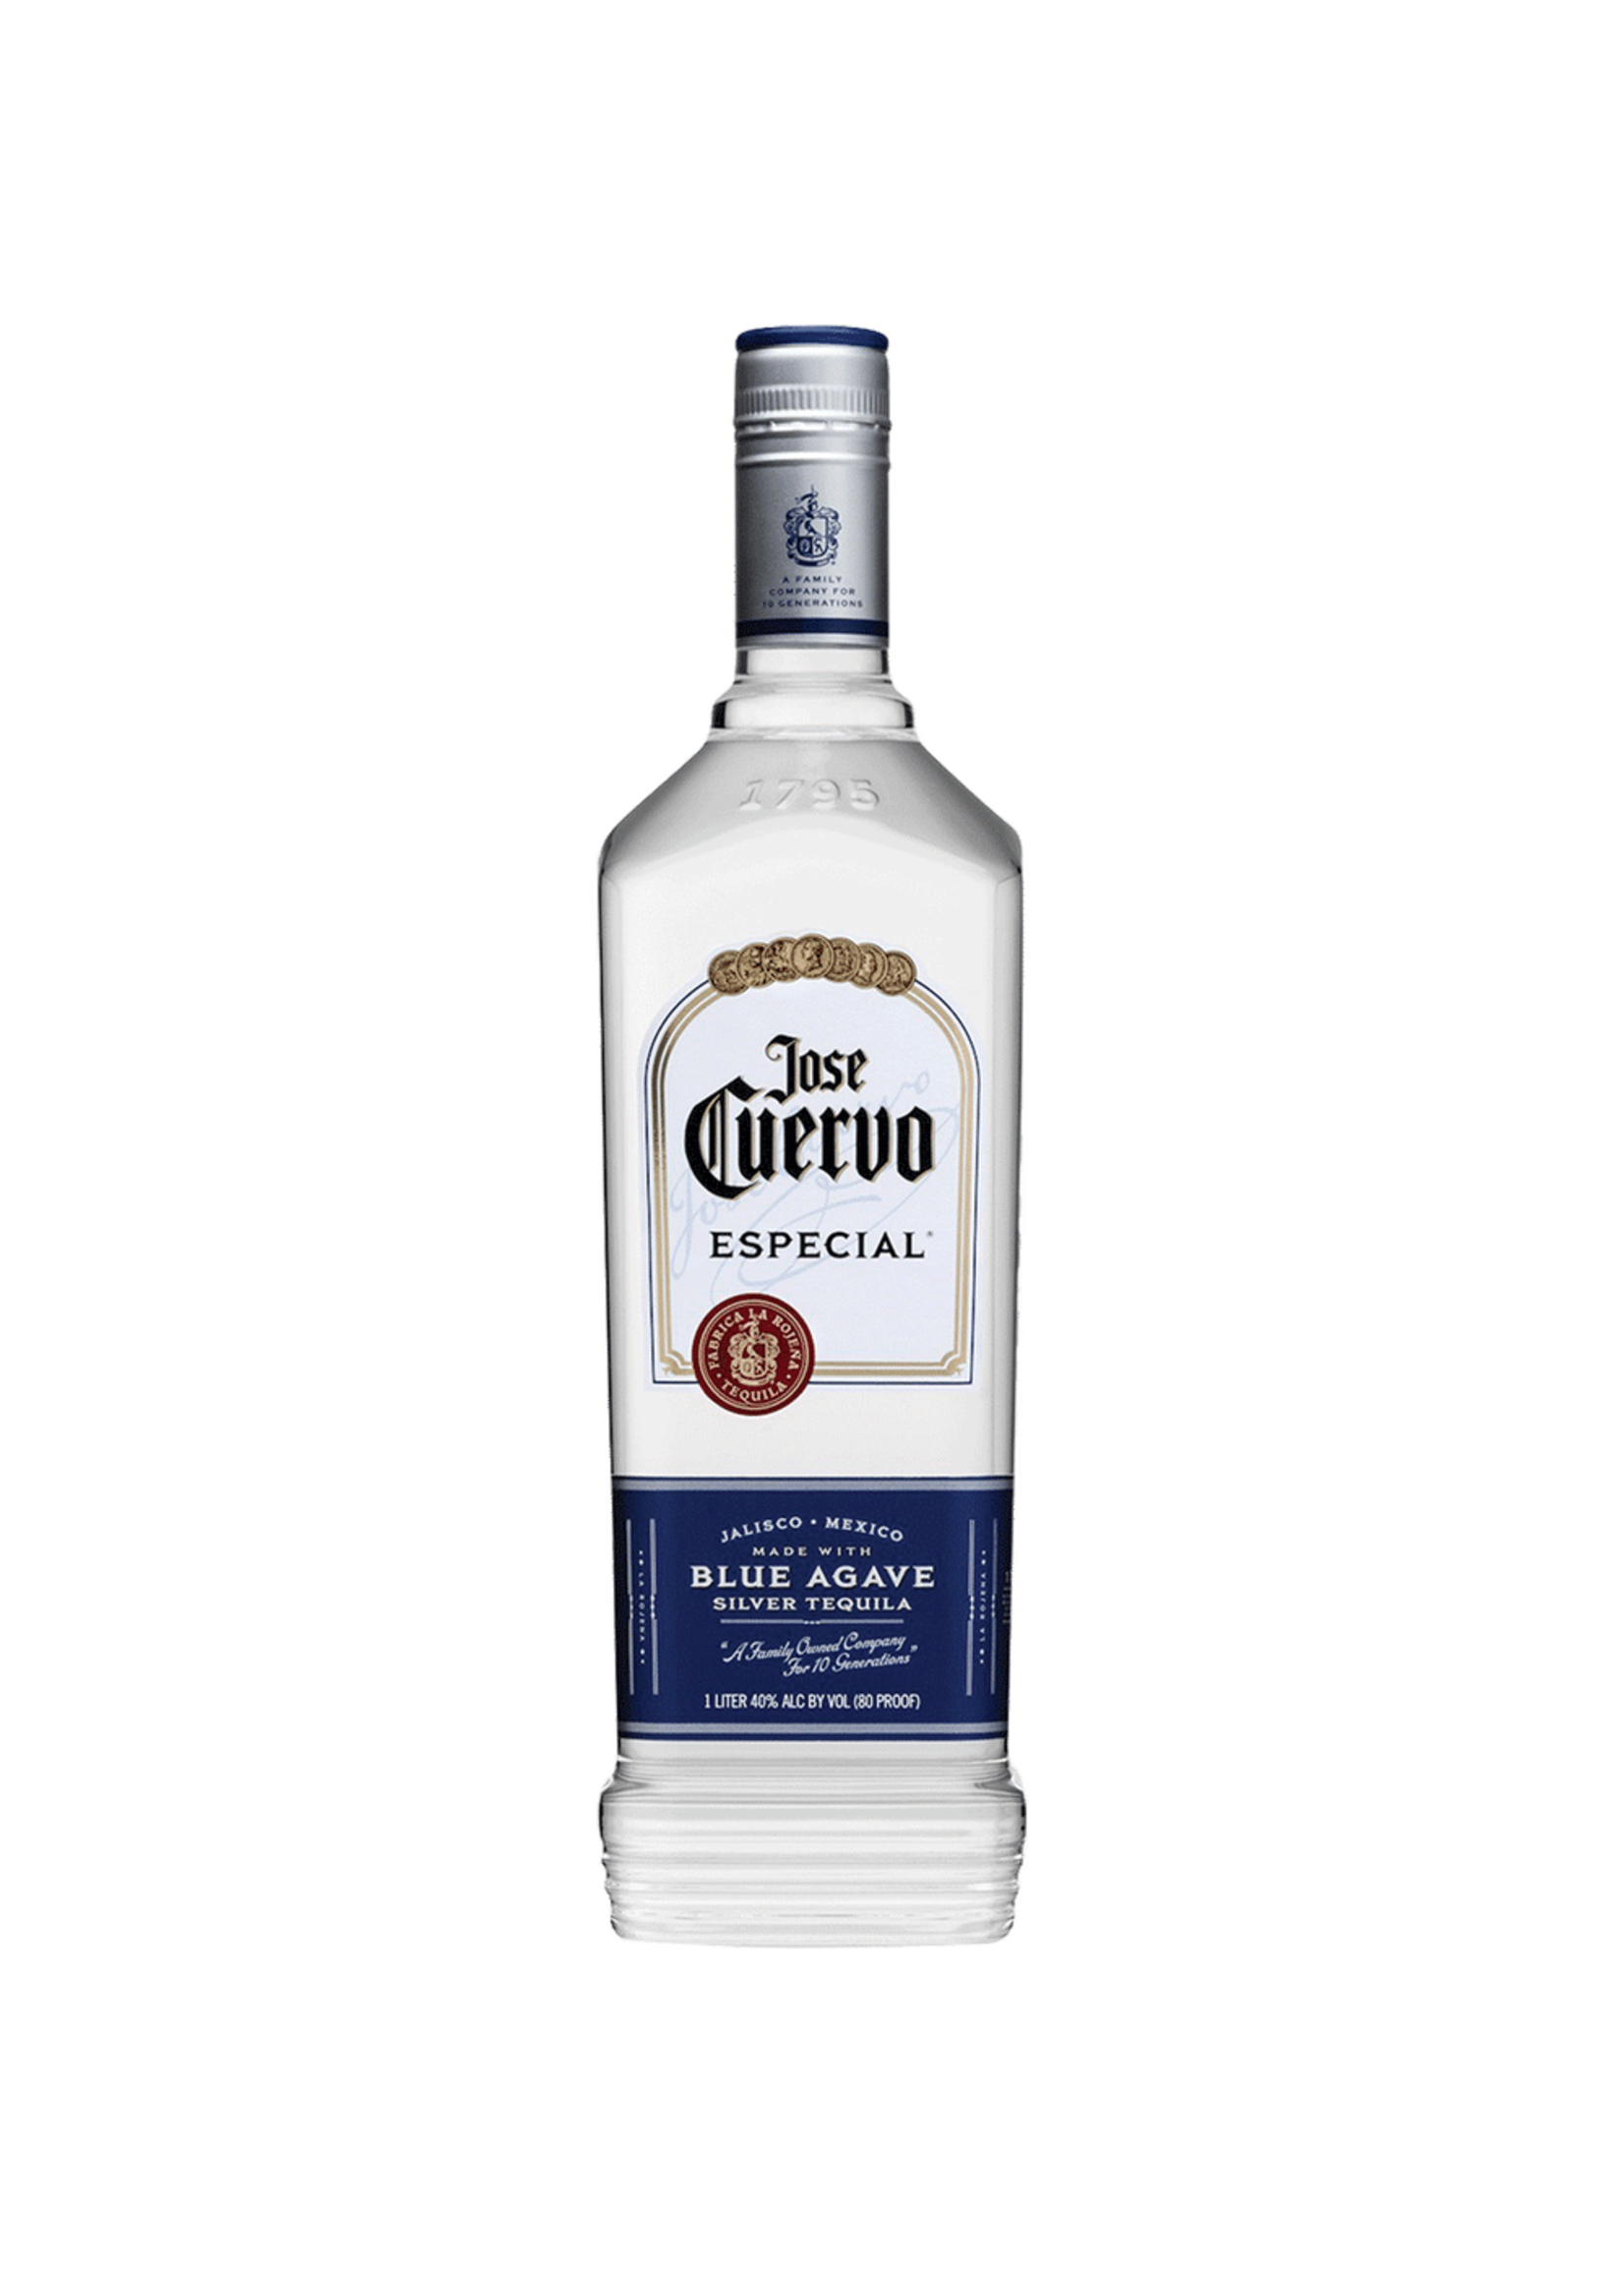 Jose Cuervo Especial Silver Tequila 80Proof 1 Ltr